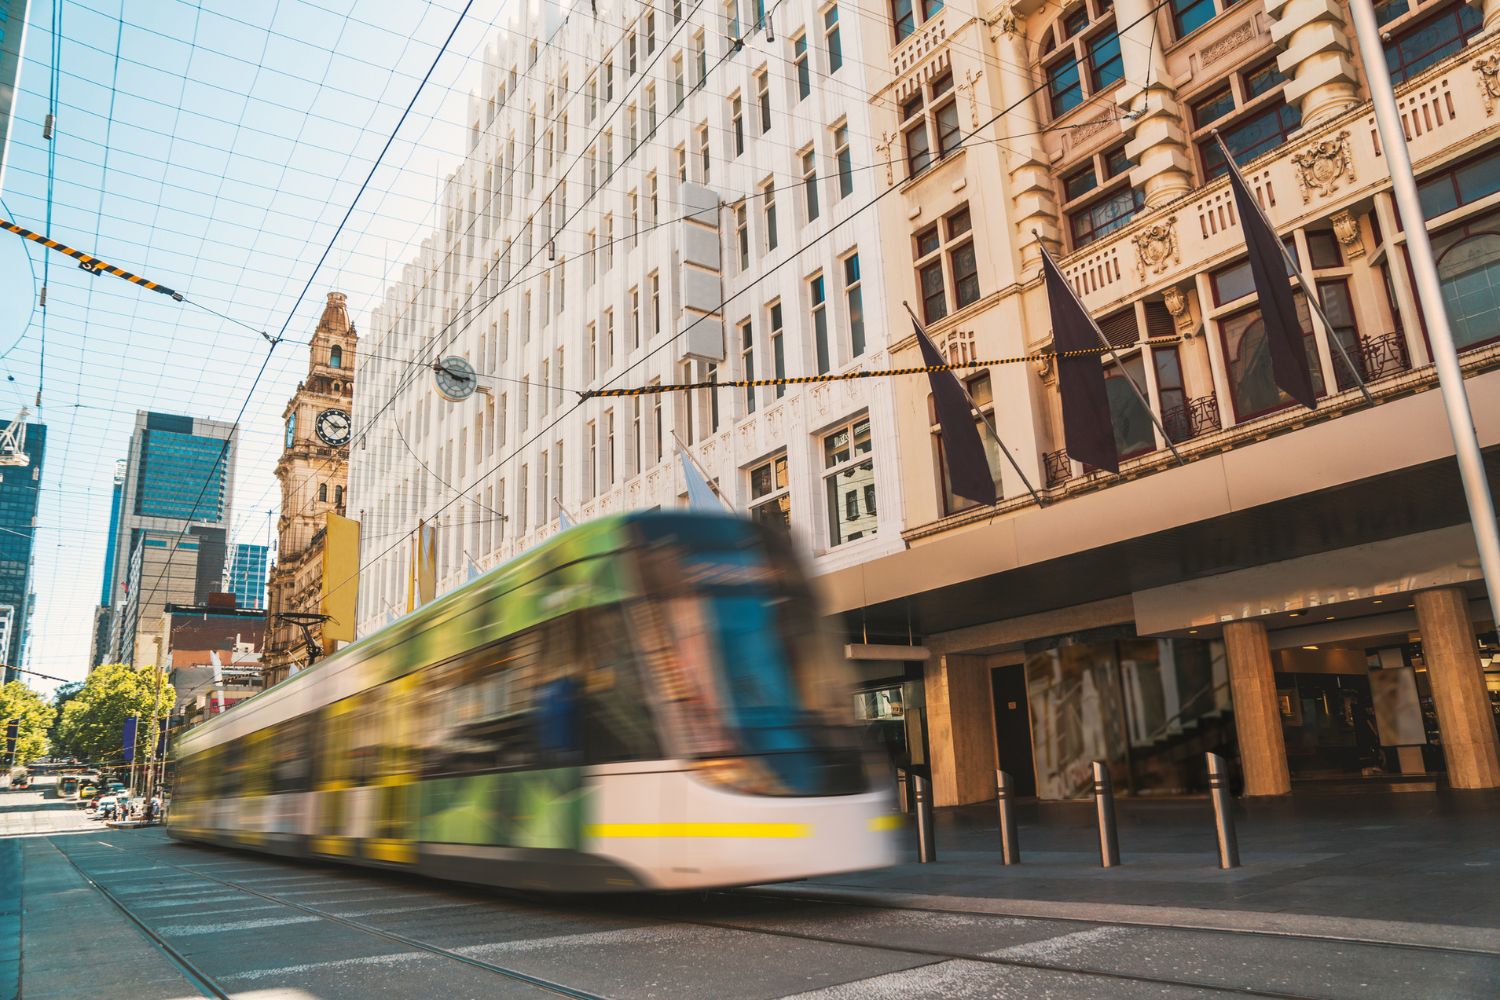 Do some tram spotting while at Bourke Street Mall.